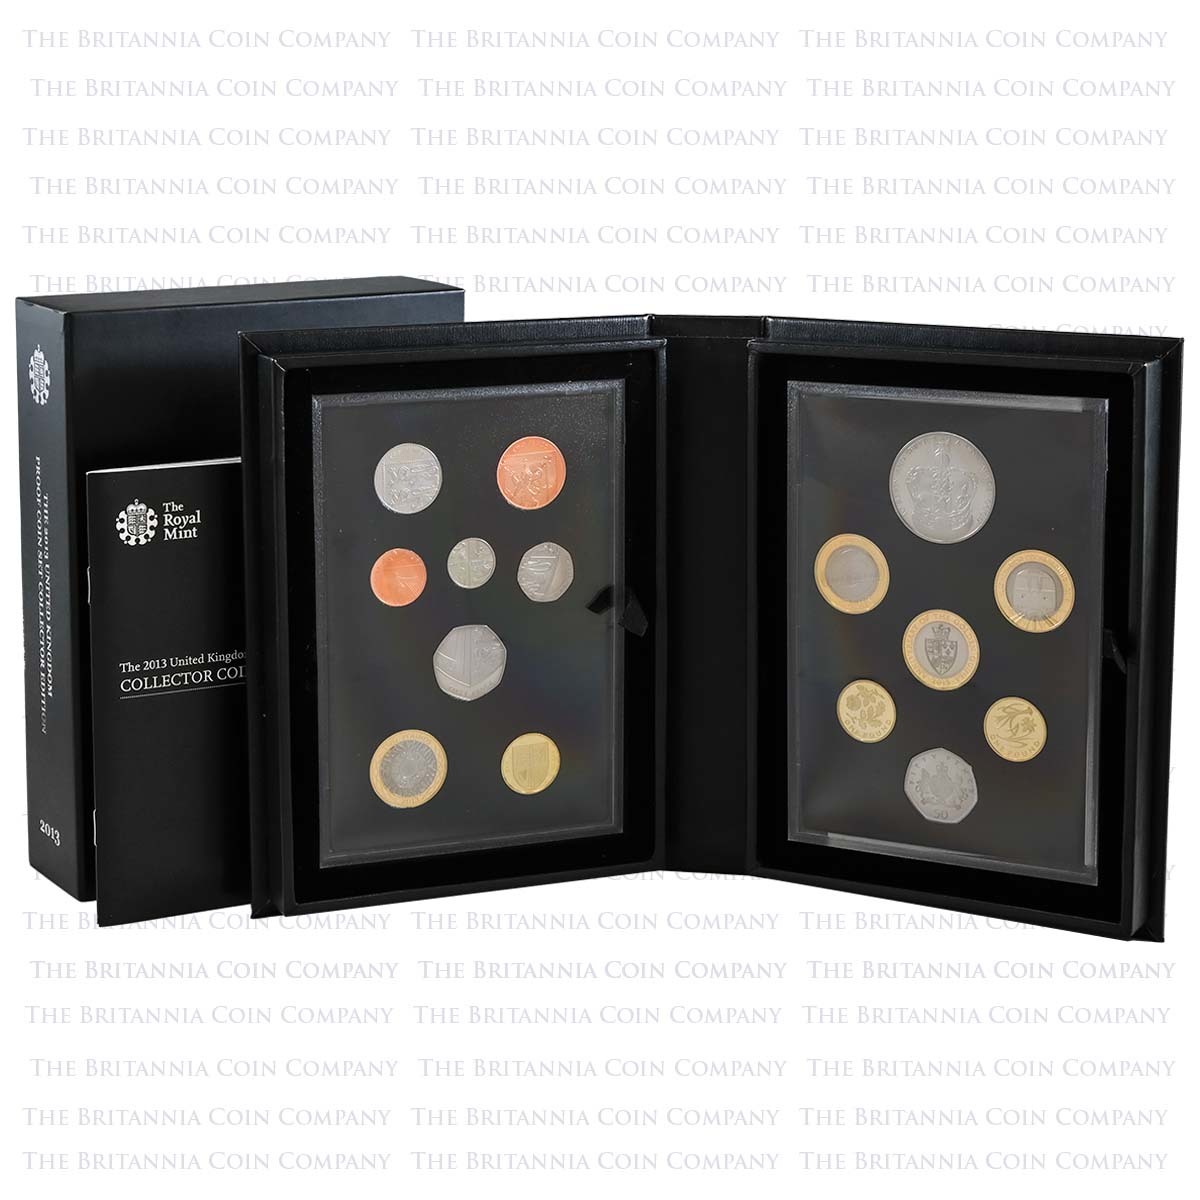 2013-proof-coin-set-collector-edtition-001-m